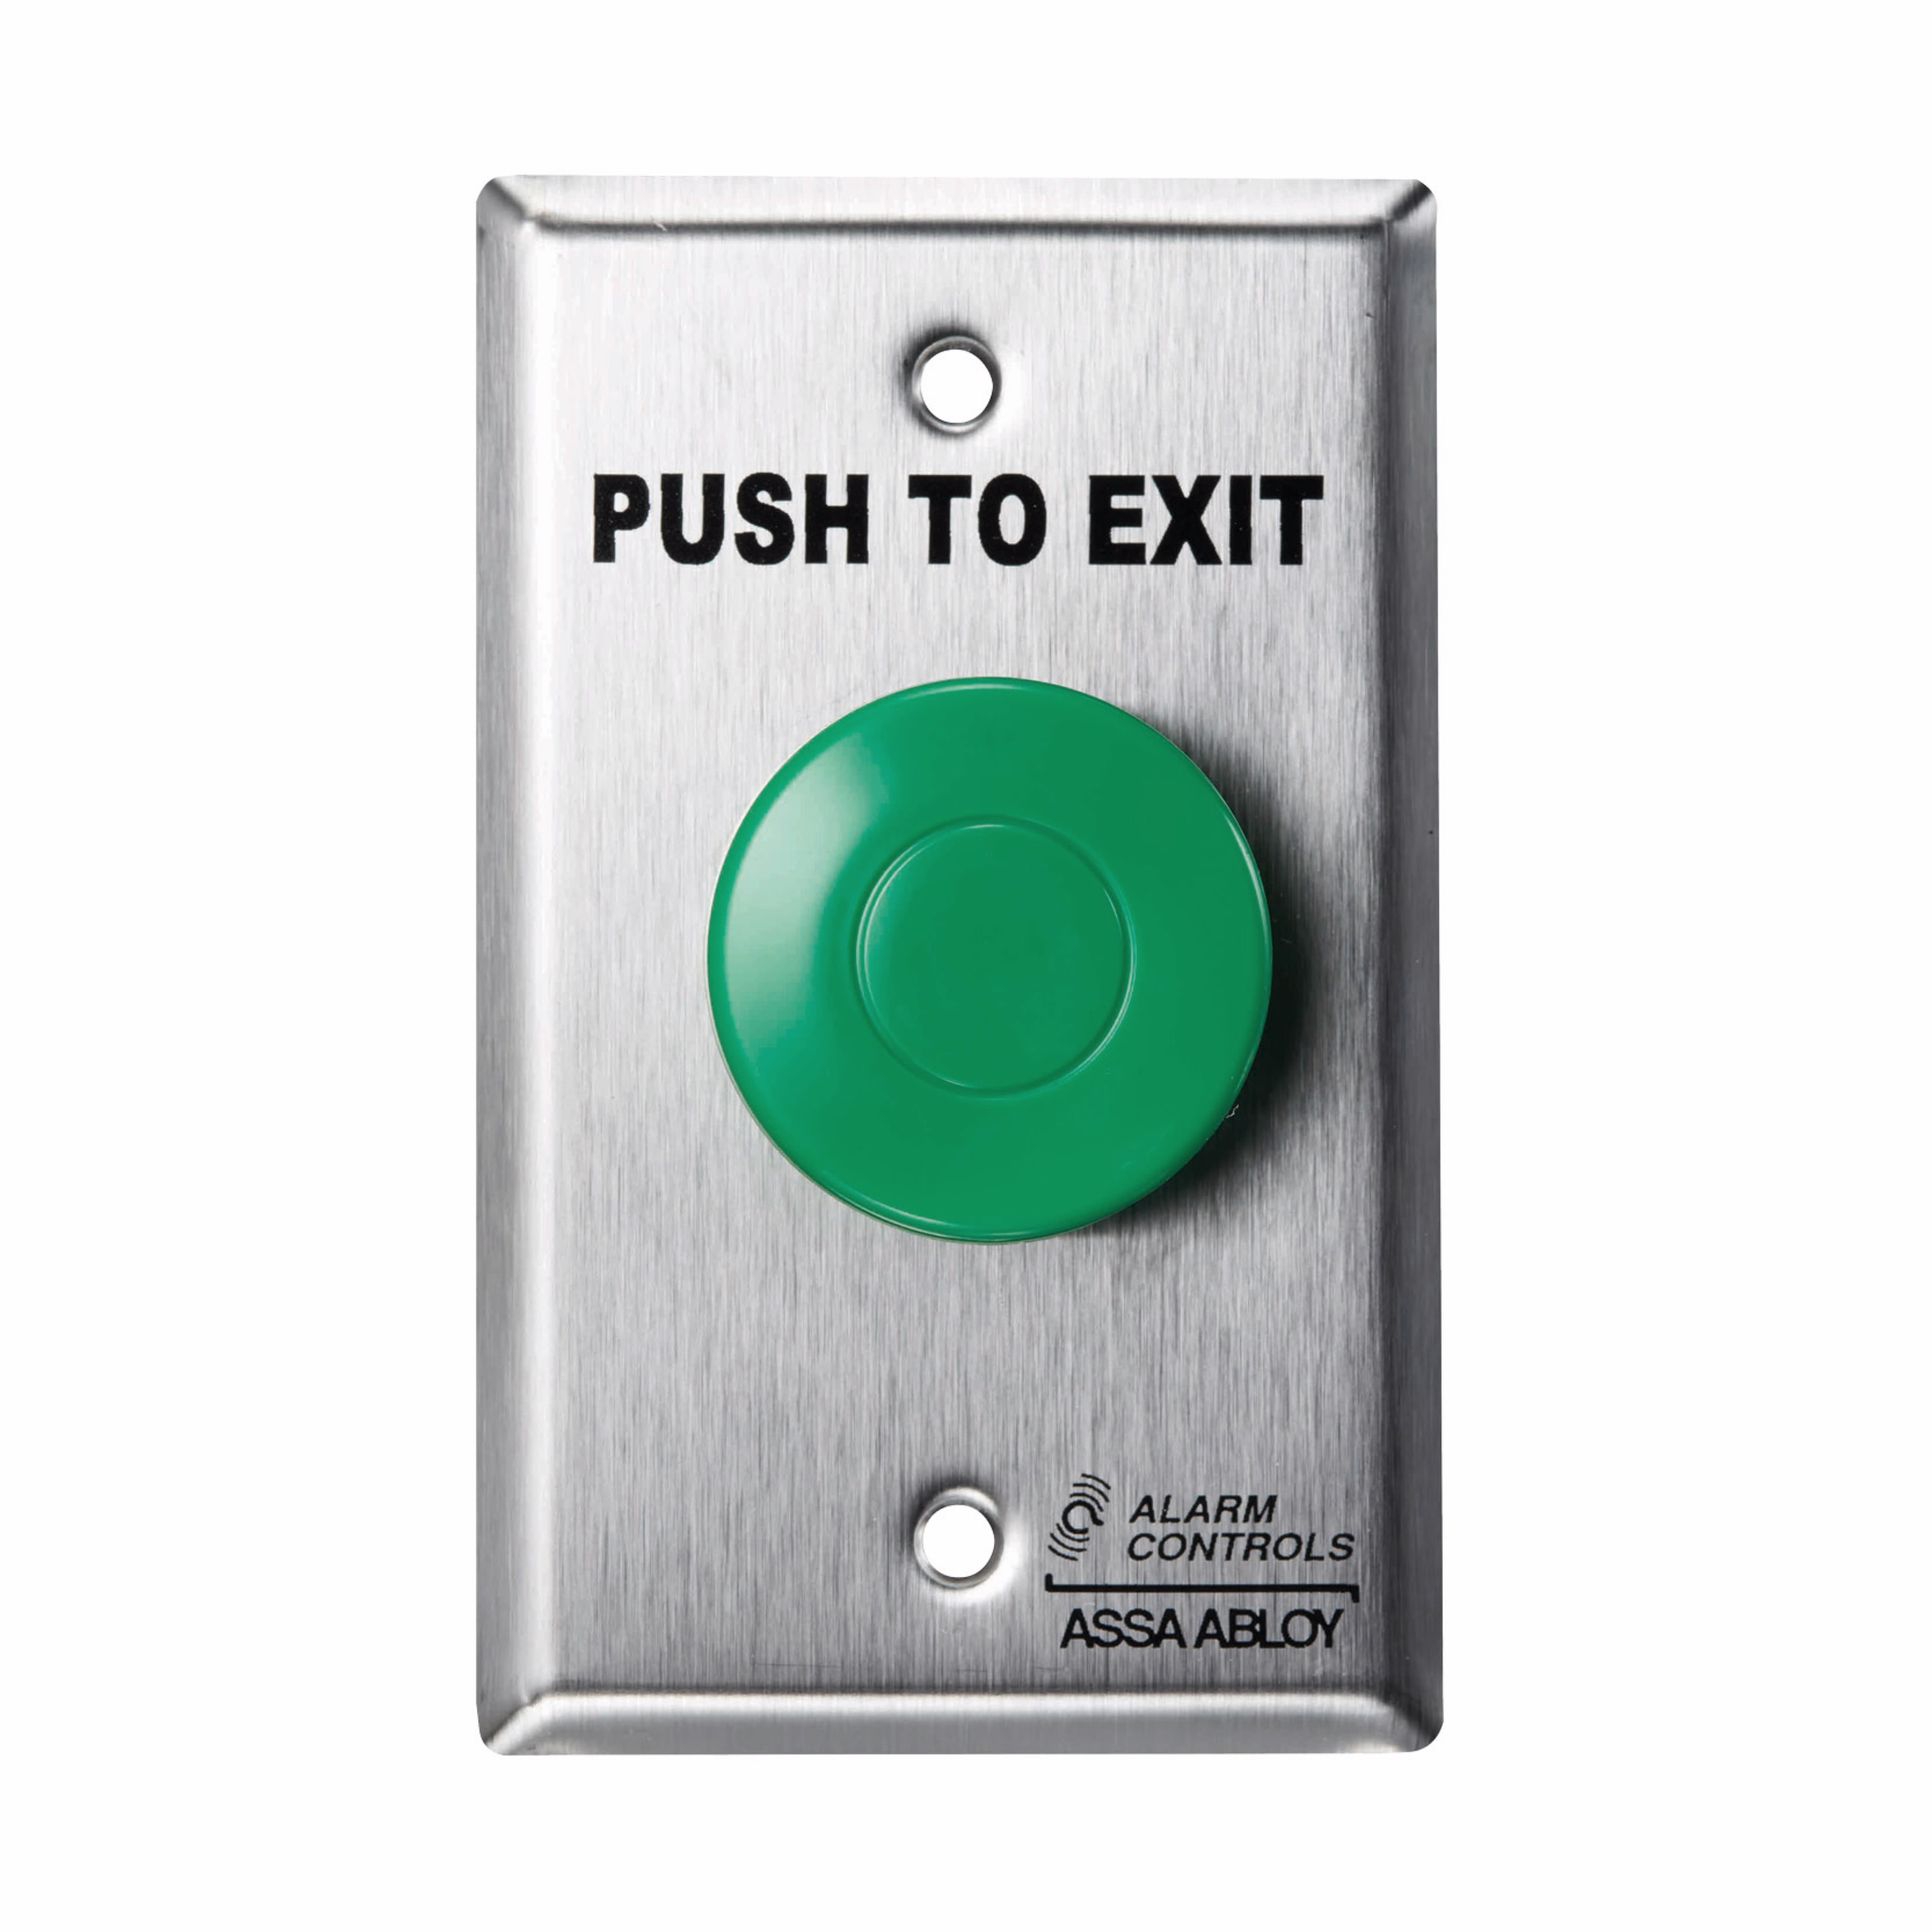 Ring on X: Request help at the push of a button when an emergency